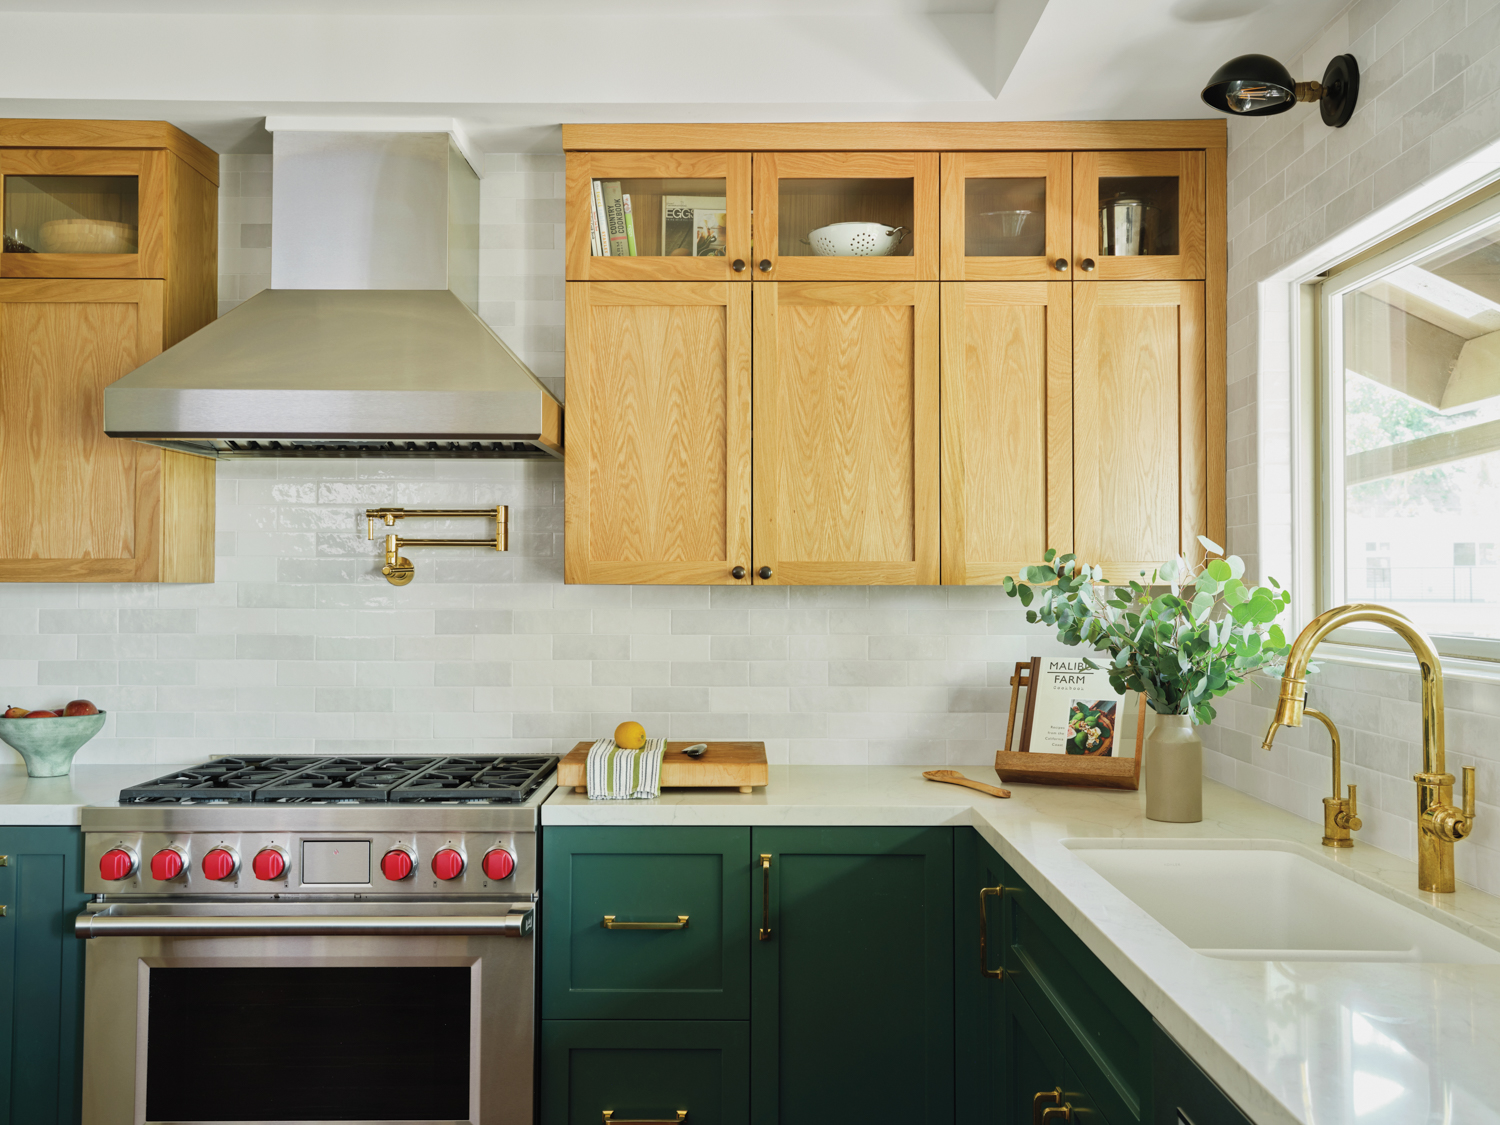 kitchen with brass faucet, hood, and green cabinets